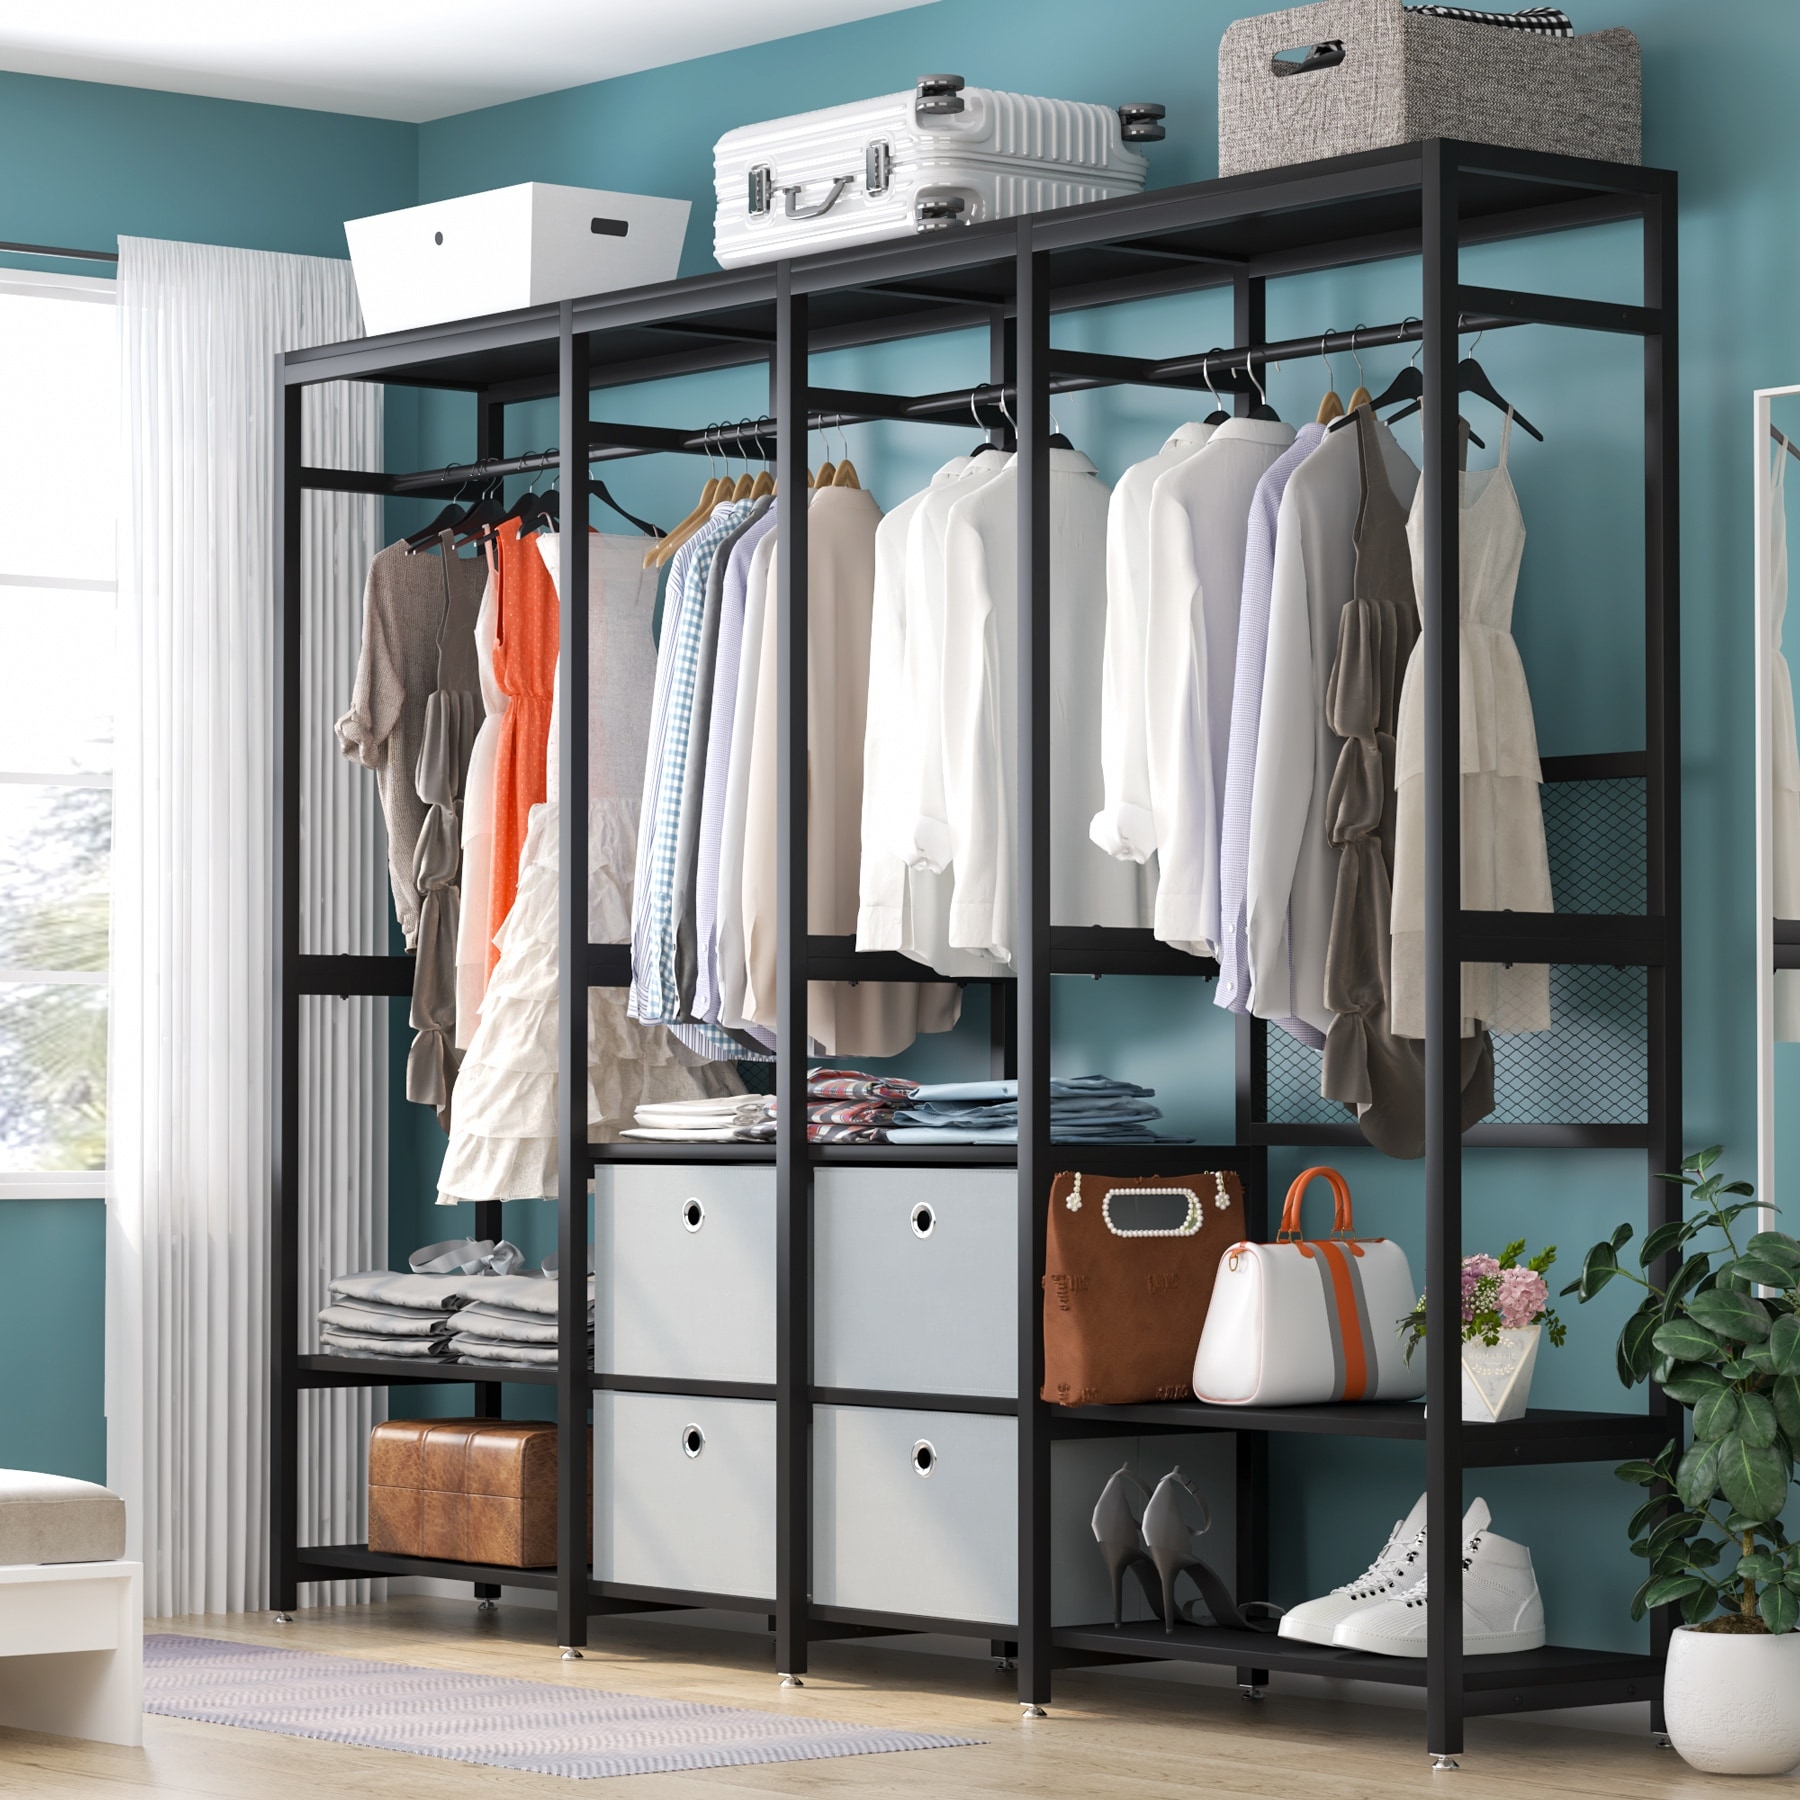 https://ak1.ostkcdn.com/images/products/is/images/direct/4ee24c372909fa48464e670c9406a3b7520274d6/Extra-Large-Freestanding-Closet-Organizer-with-Shelves-and-Hanging-Rods.jpg